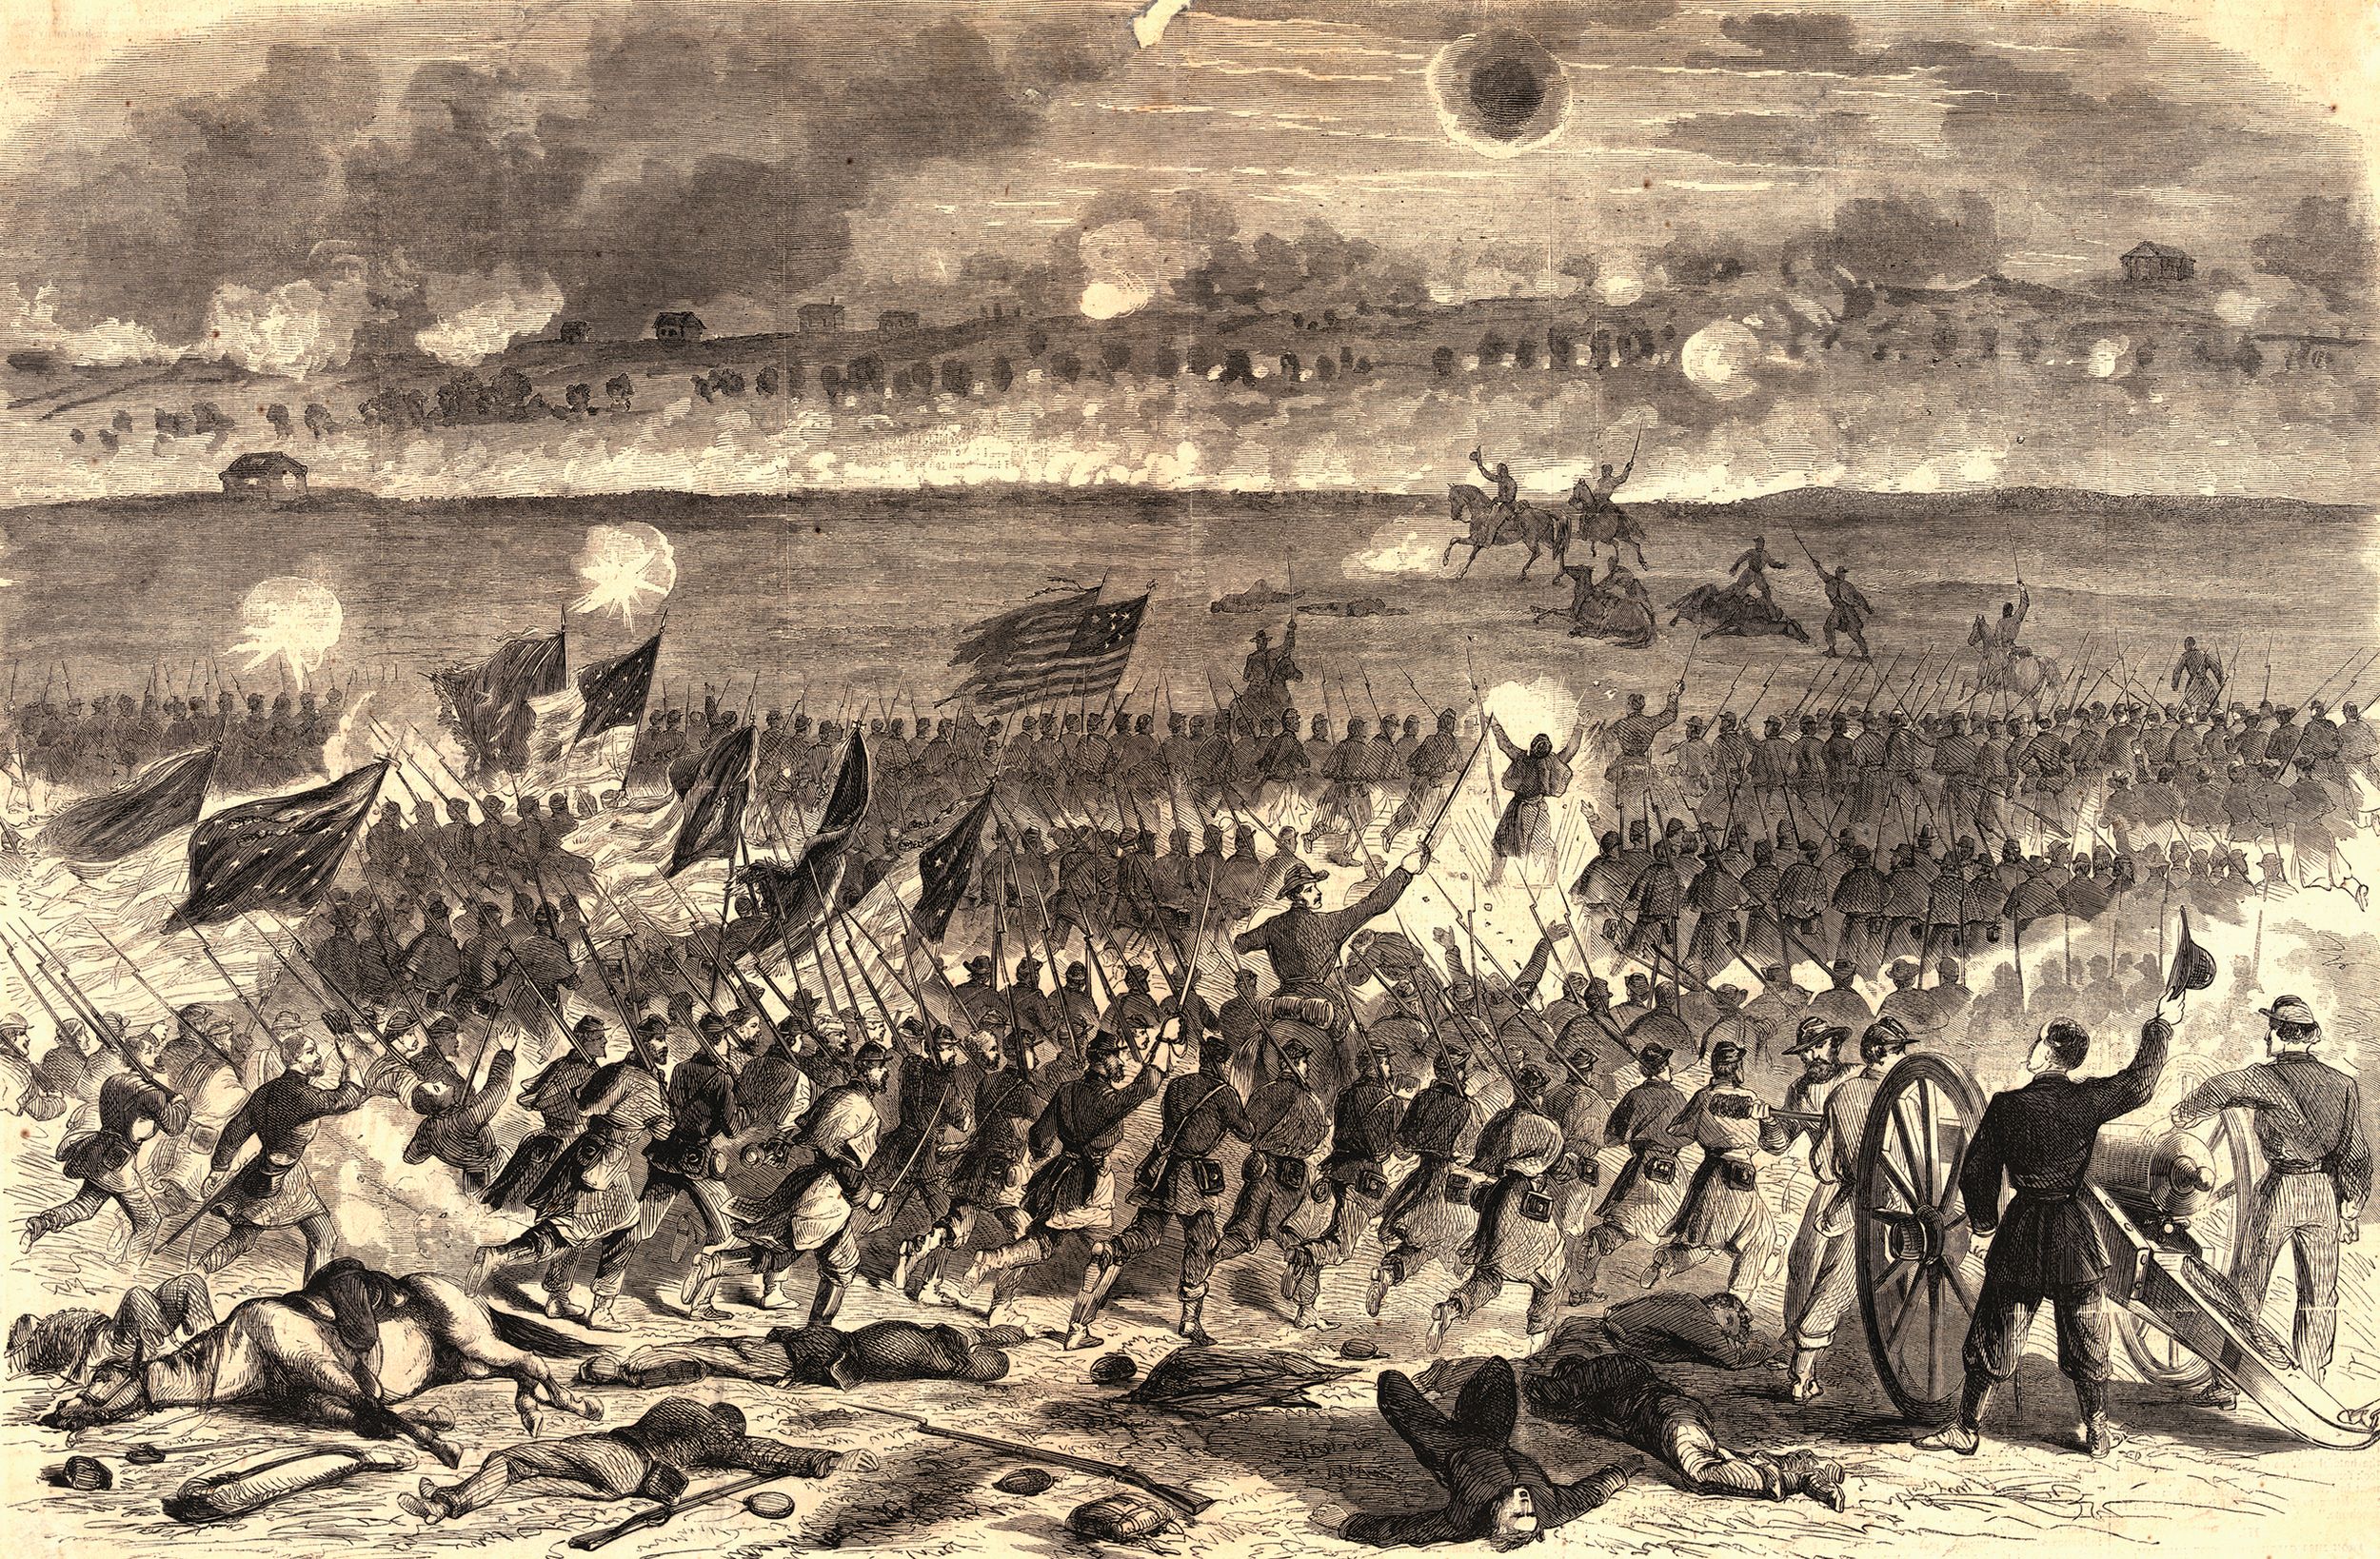 This engraving depicts a massive Union charge at the Battle of Fredericksburg, December 13, 1862. Abbott recalled the carnage, “Oh, the horrors of war... Thousands of wounded, dying 
or dead. I can never forget that night...” 